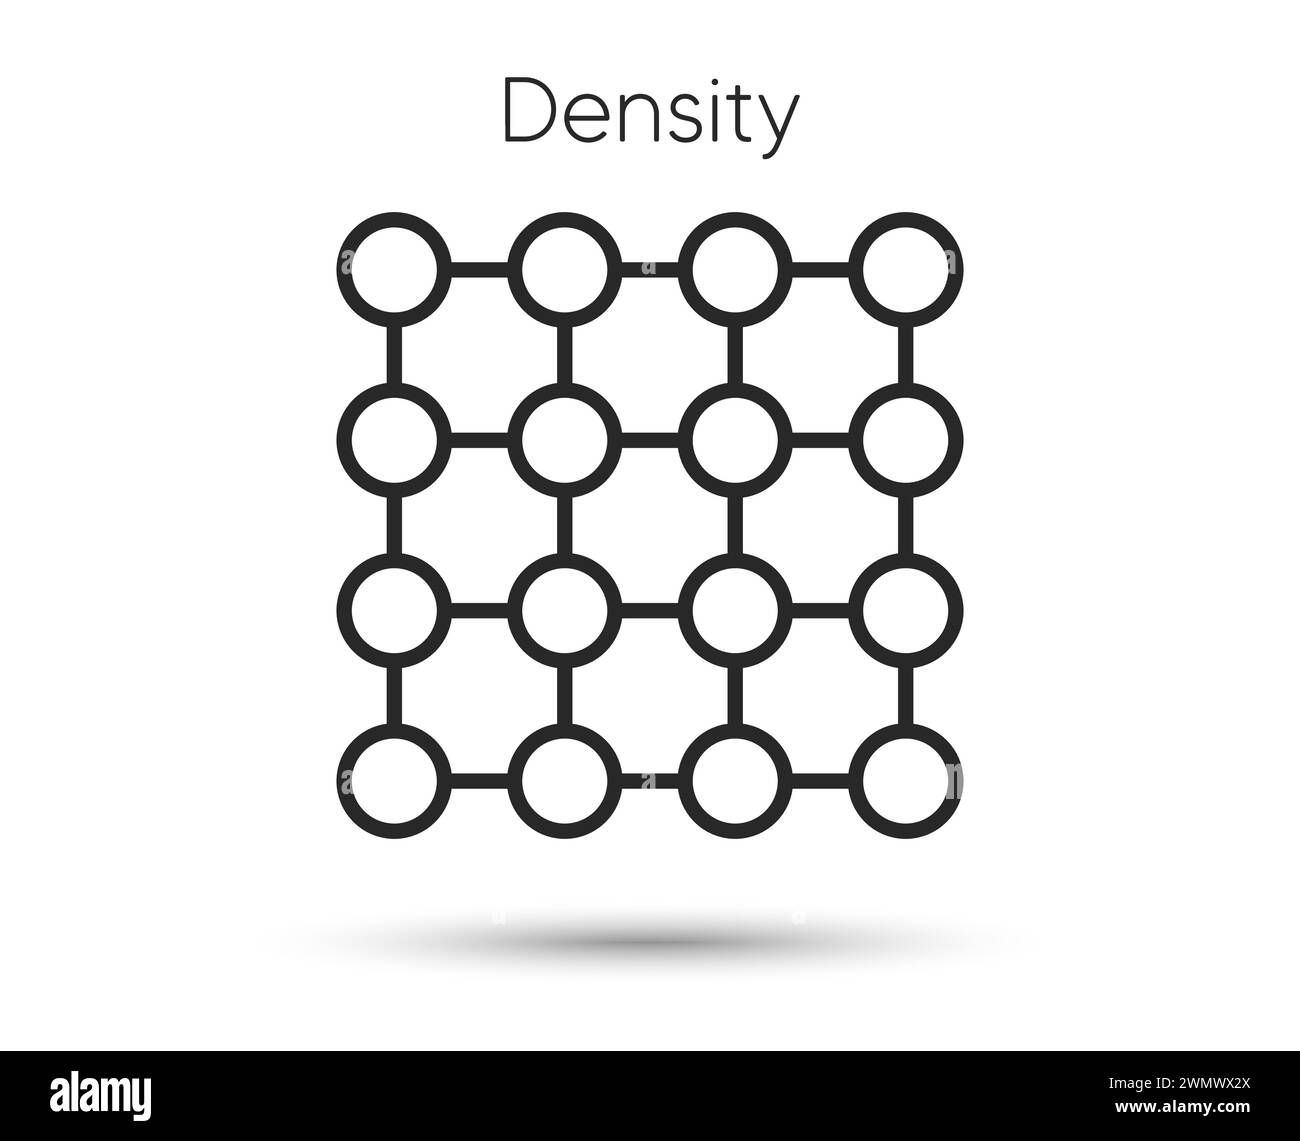 Density line icon. Gas particles grid sign. High porosity symbol. Vector Stock Vector